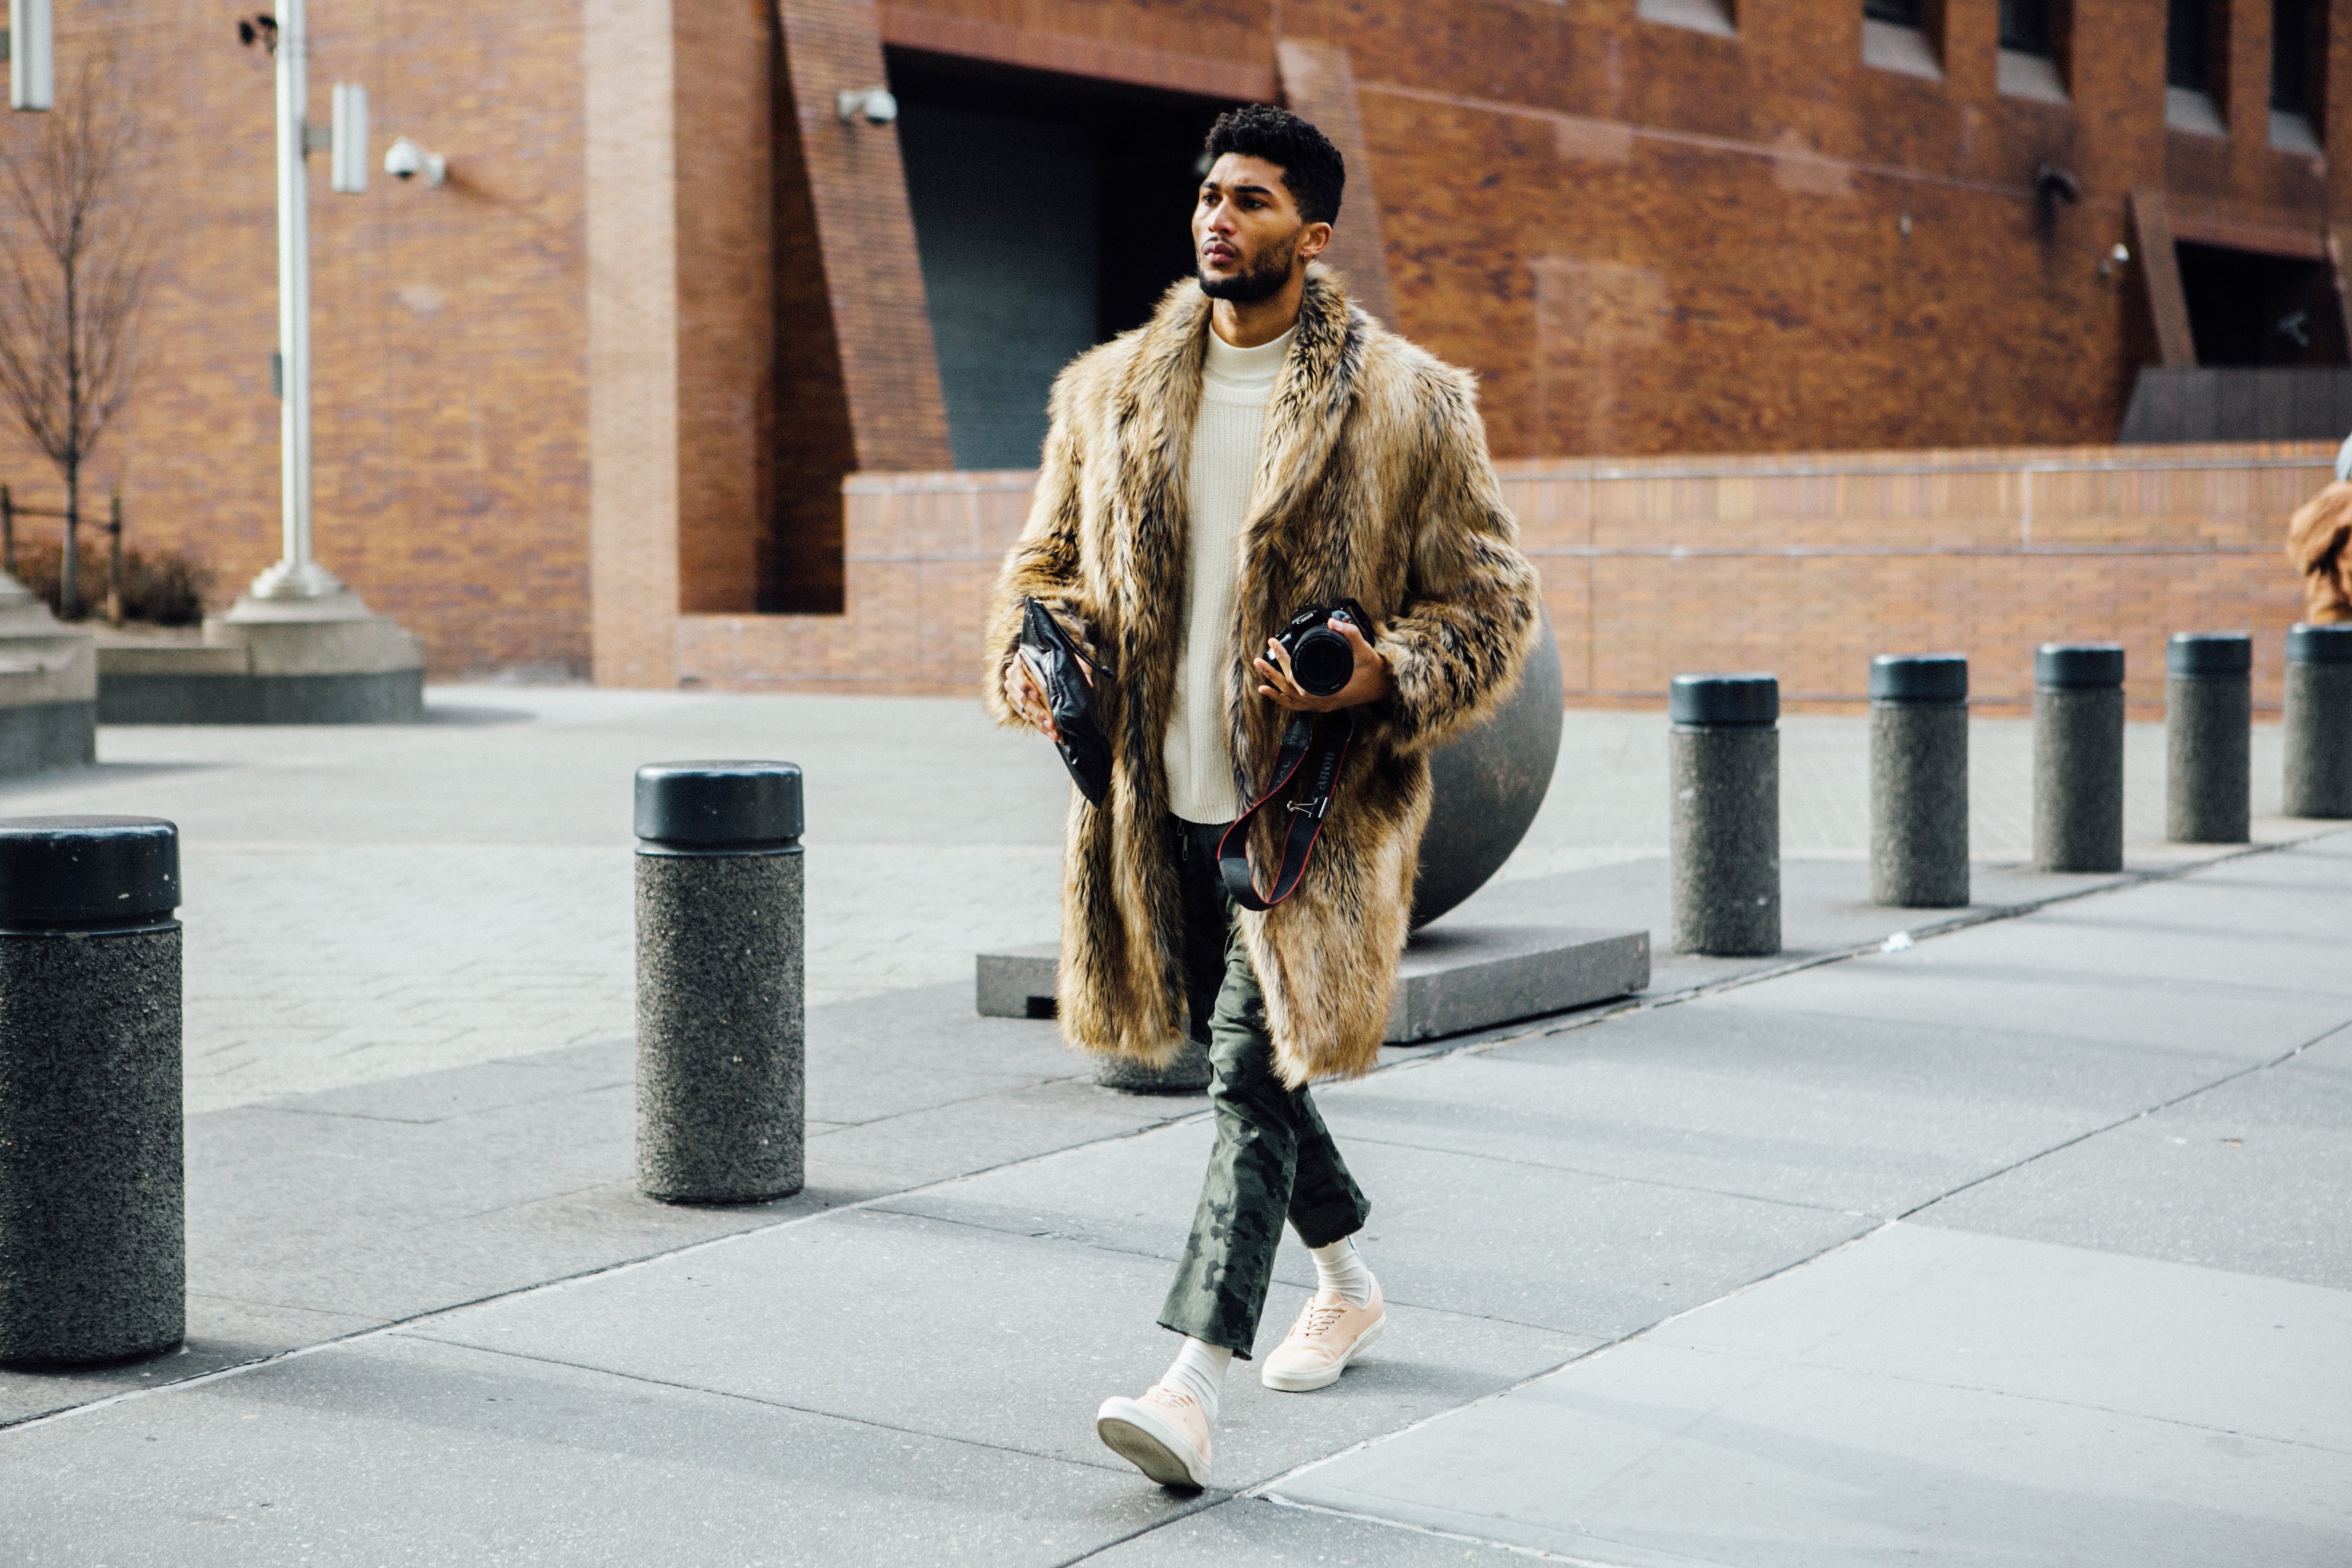 The Snow Didn't Stop The Fashion Parade at Men's Fashion Week in New York City
